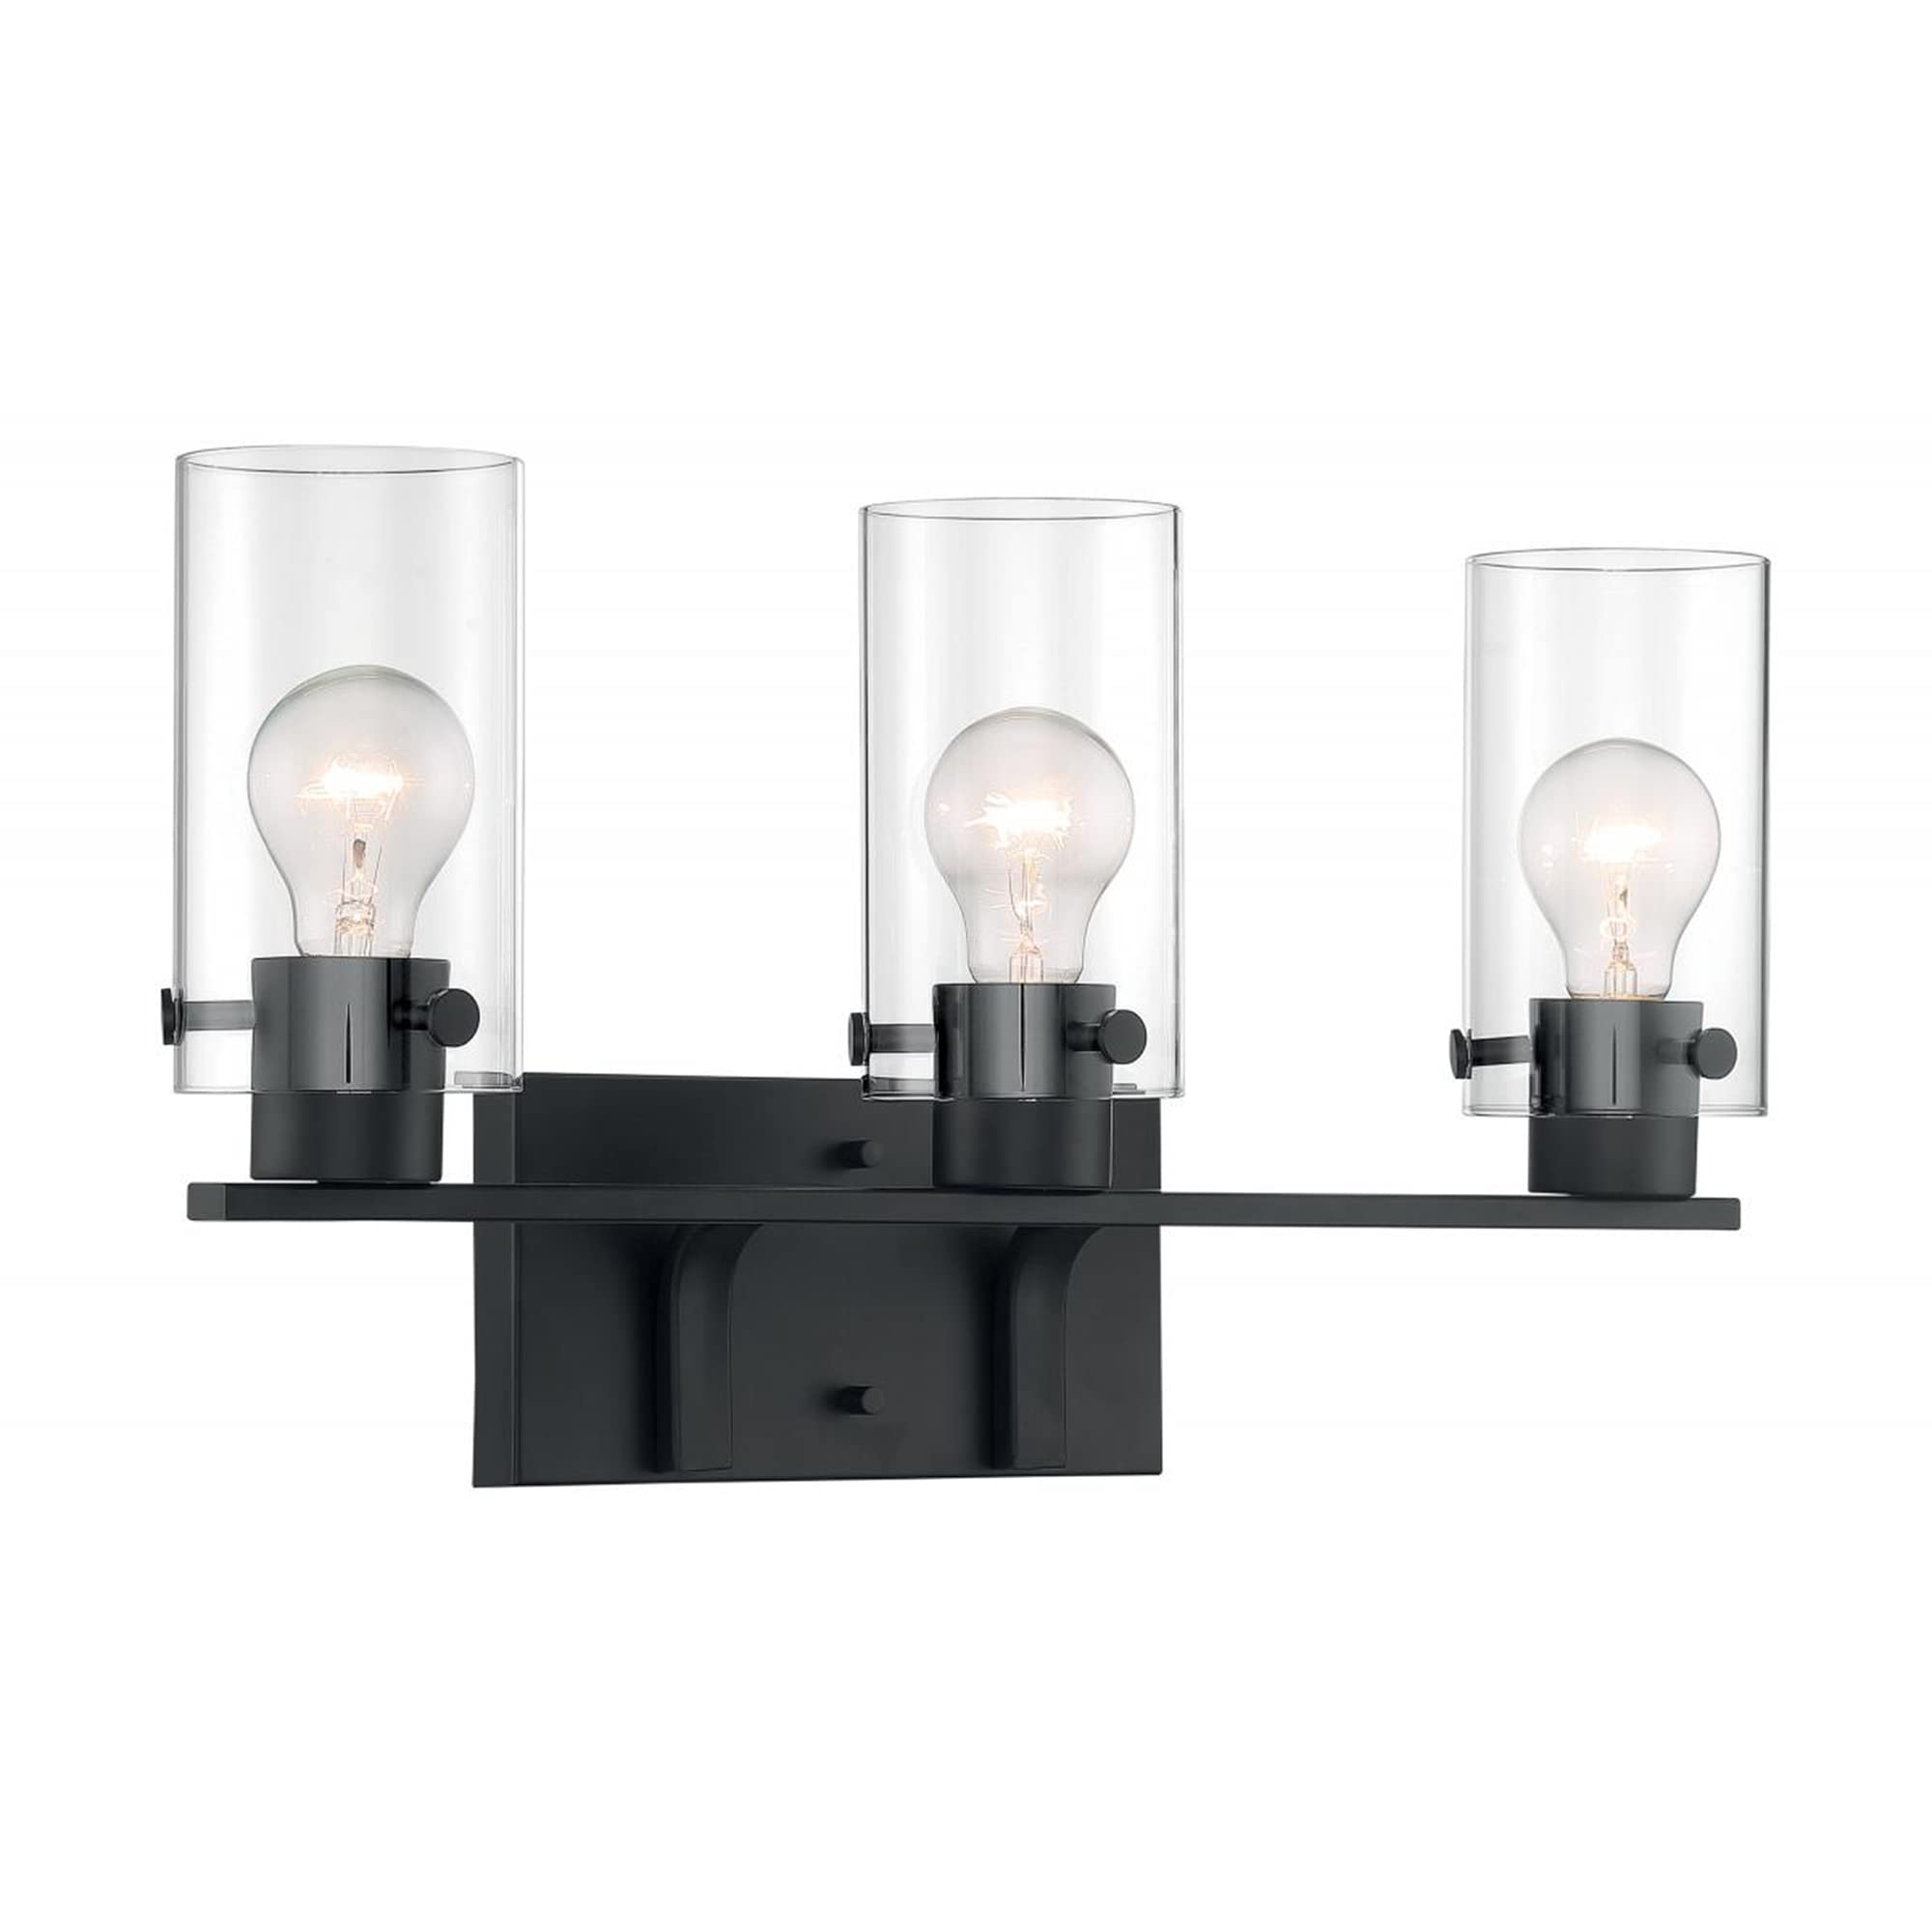 Ciata Lighting 3 Light Matte Black Vanity Light Fixture with Clear Cylinder Glass Shade, Matte Black Bathroom Light Wall Sconce Over Mirror, Up/Down Installation, Metal Wall Mounted Lamp  - Like New